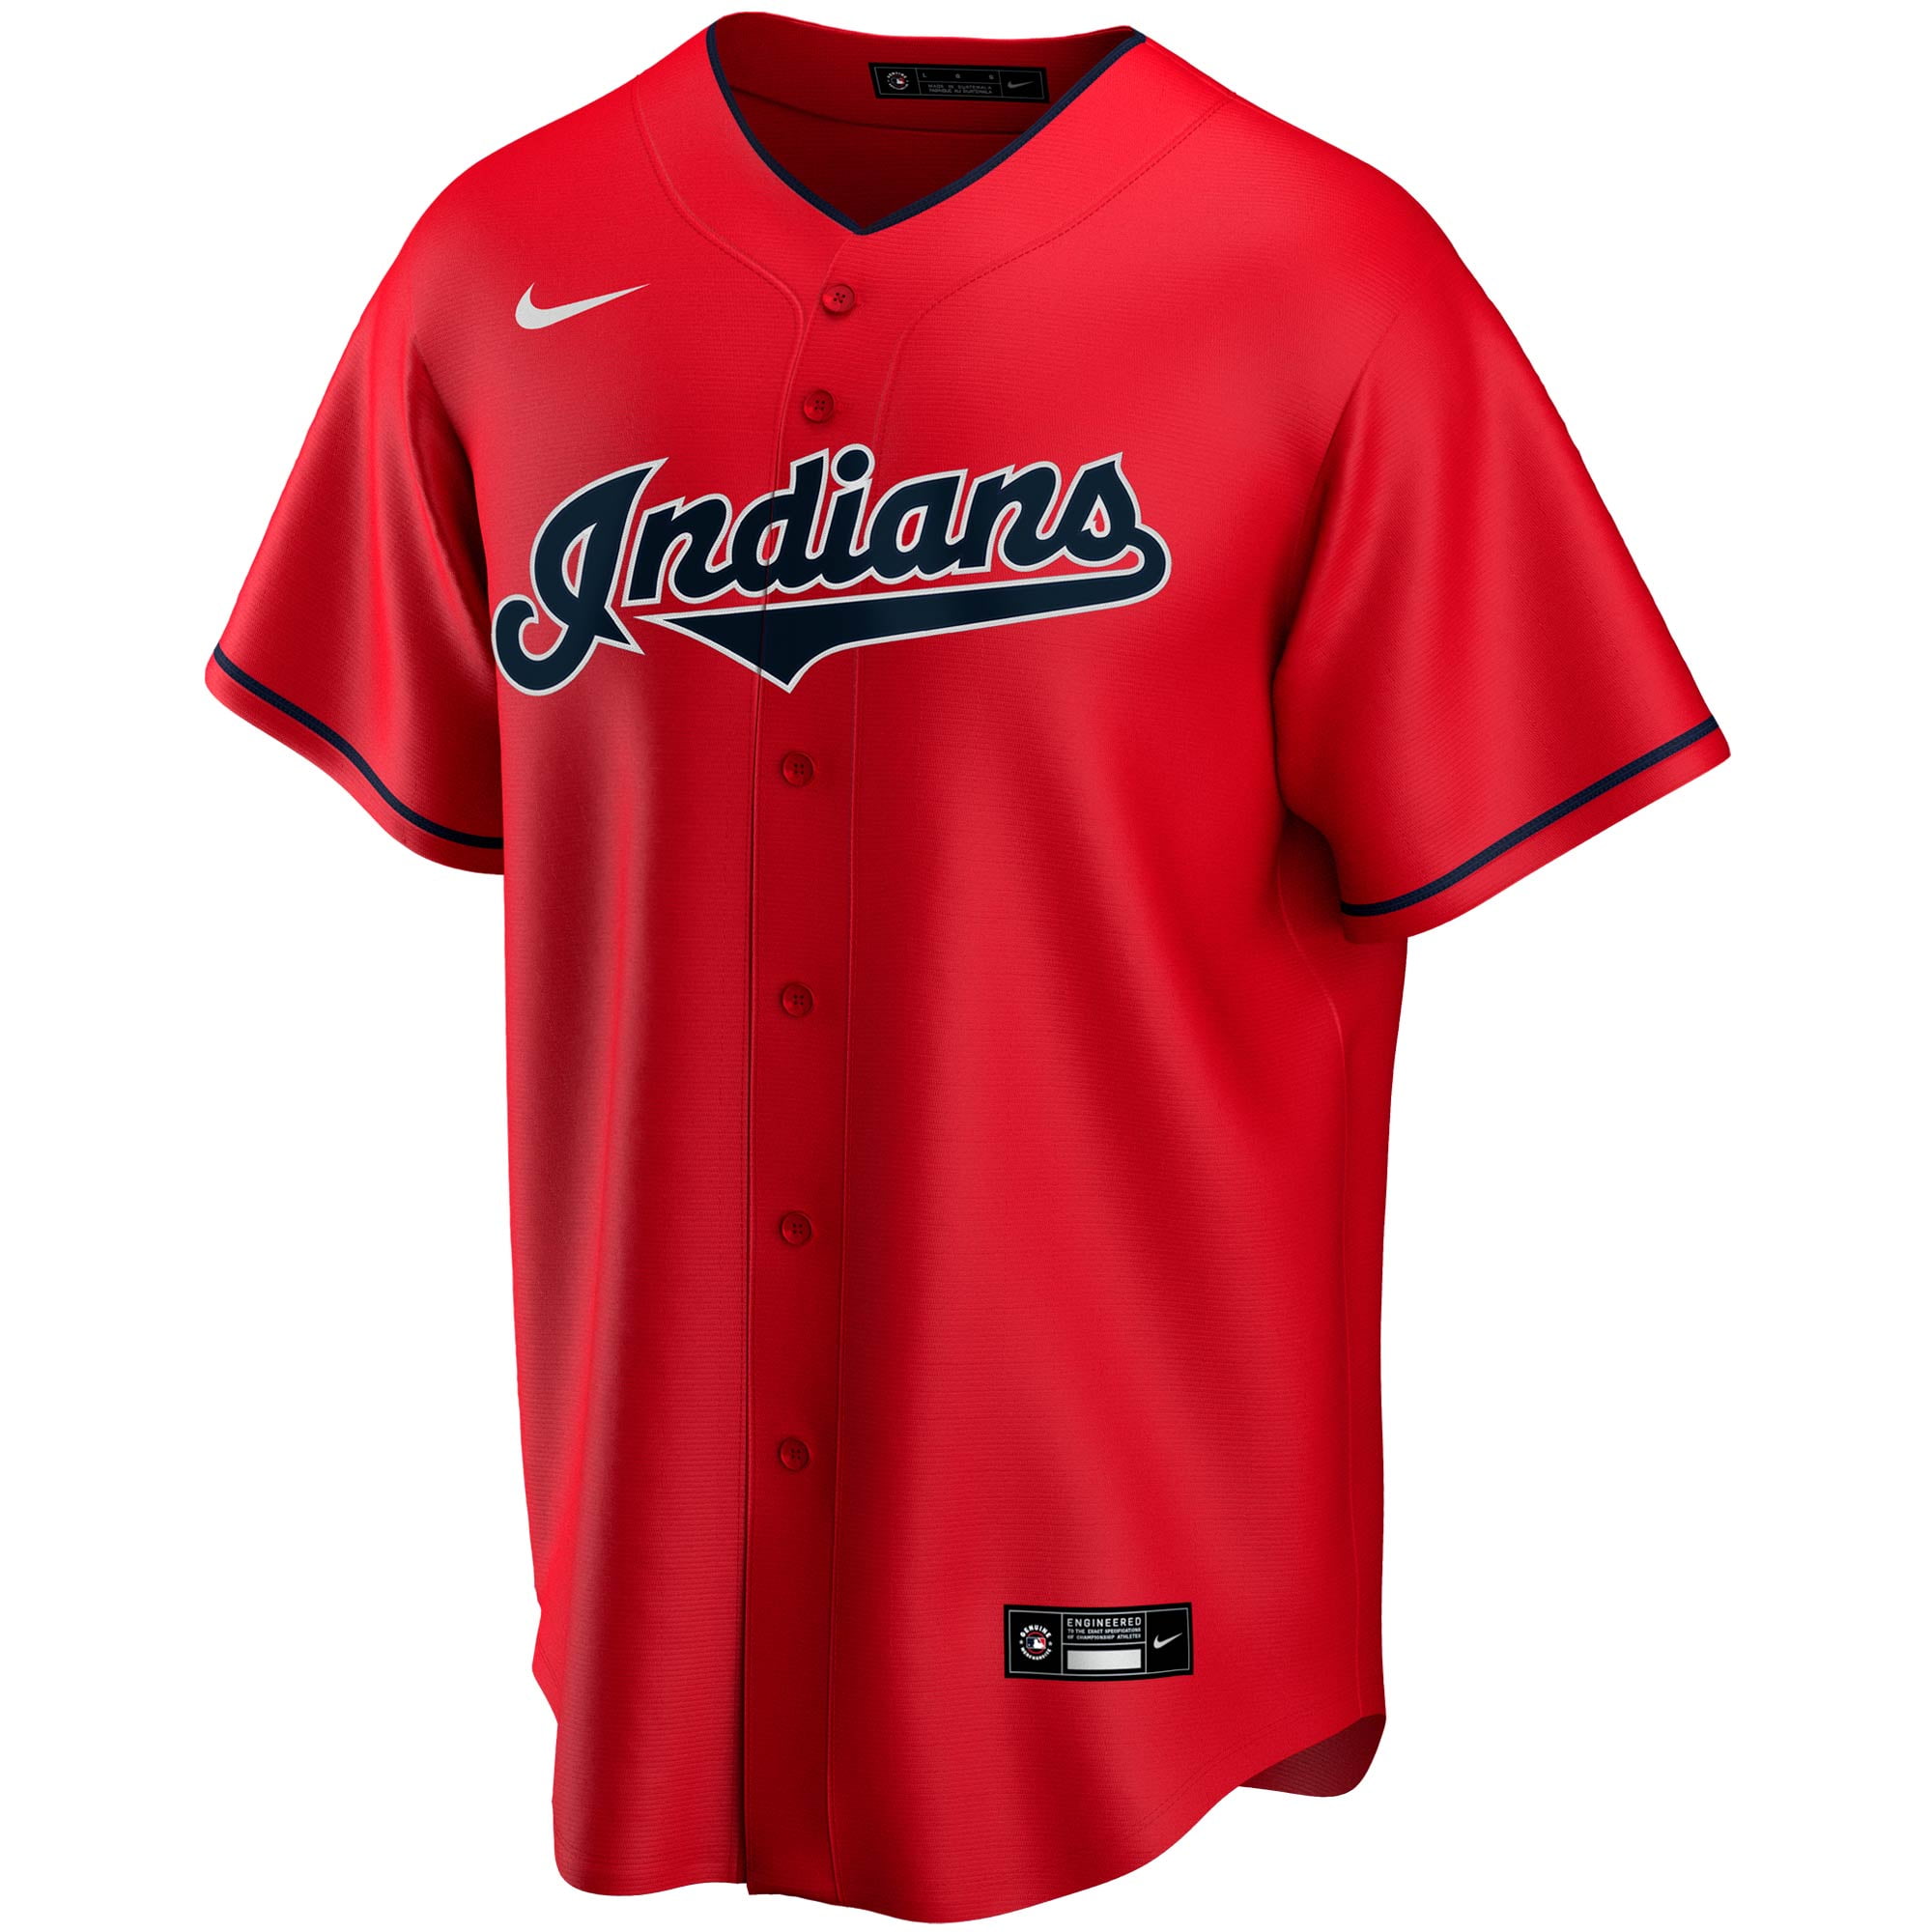 cleveland indians home jersey